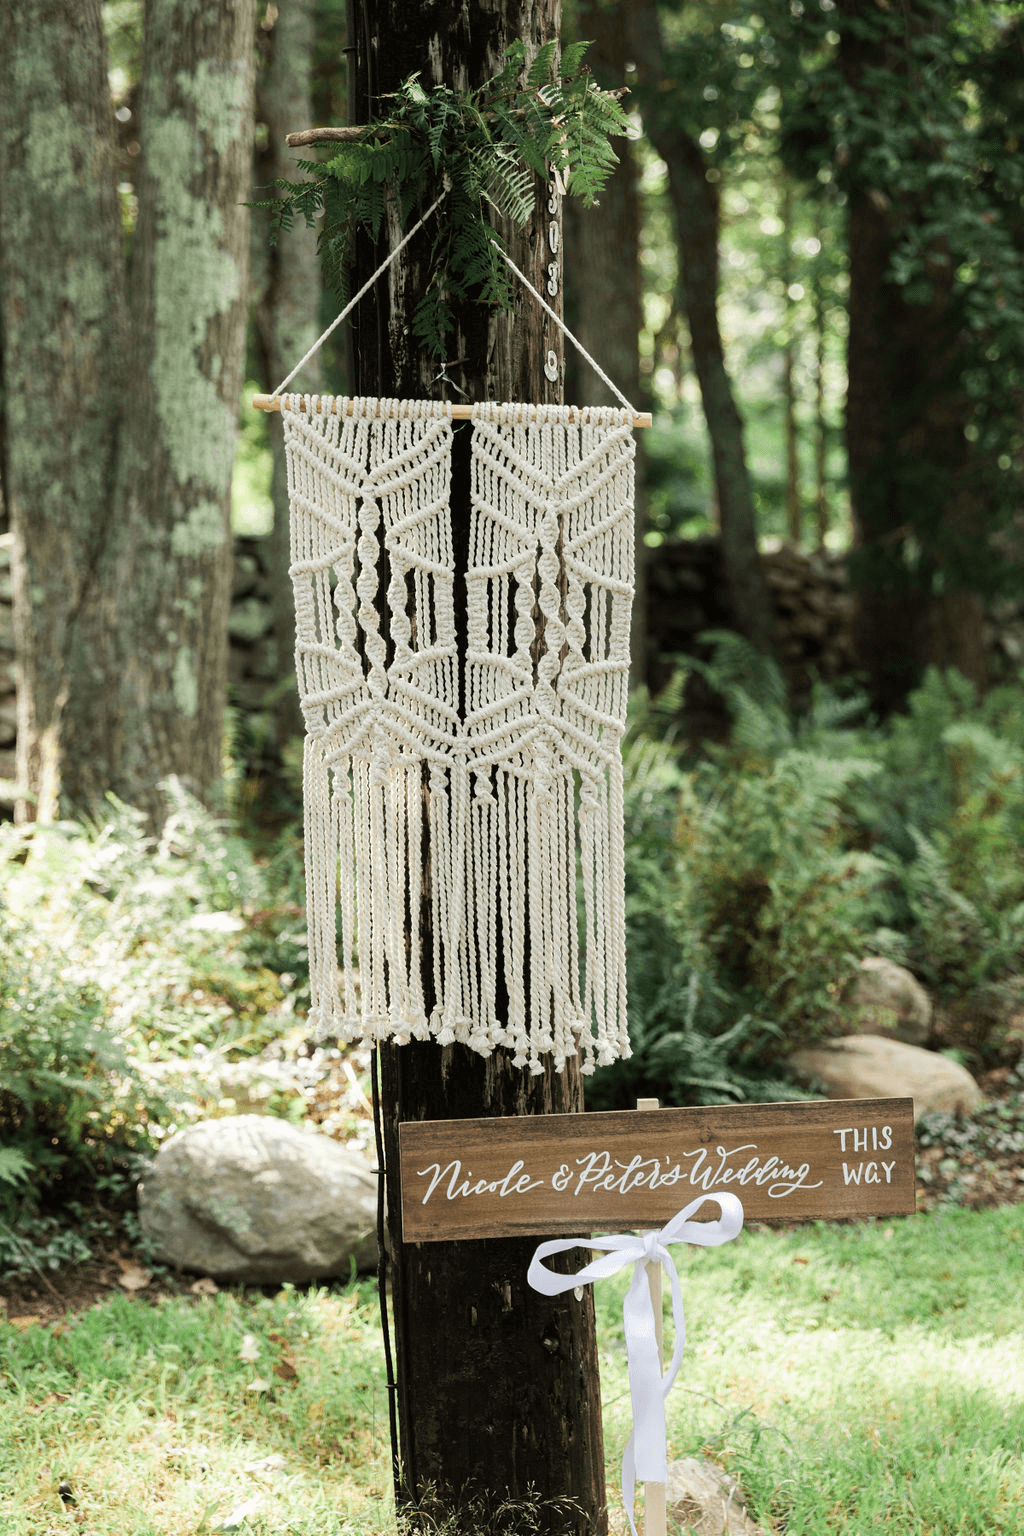 A woven tapestry hanging in the woods and a sign leading to the wedding